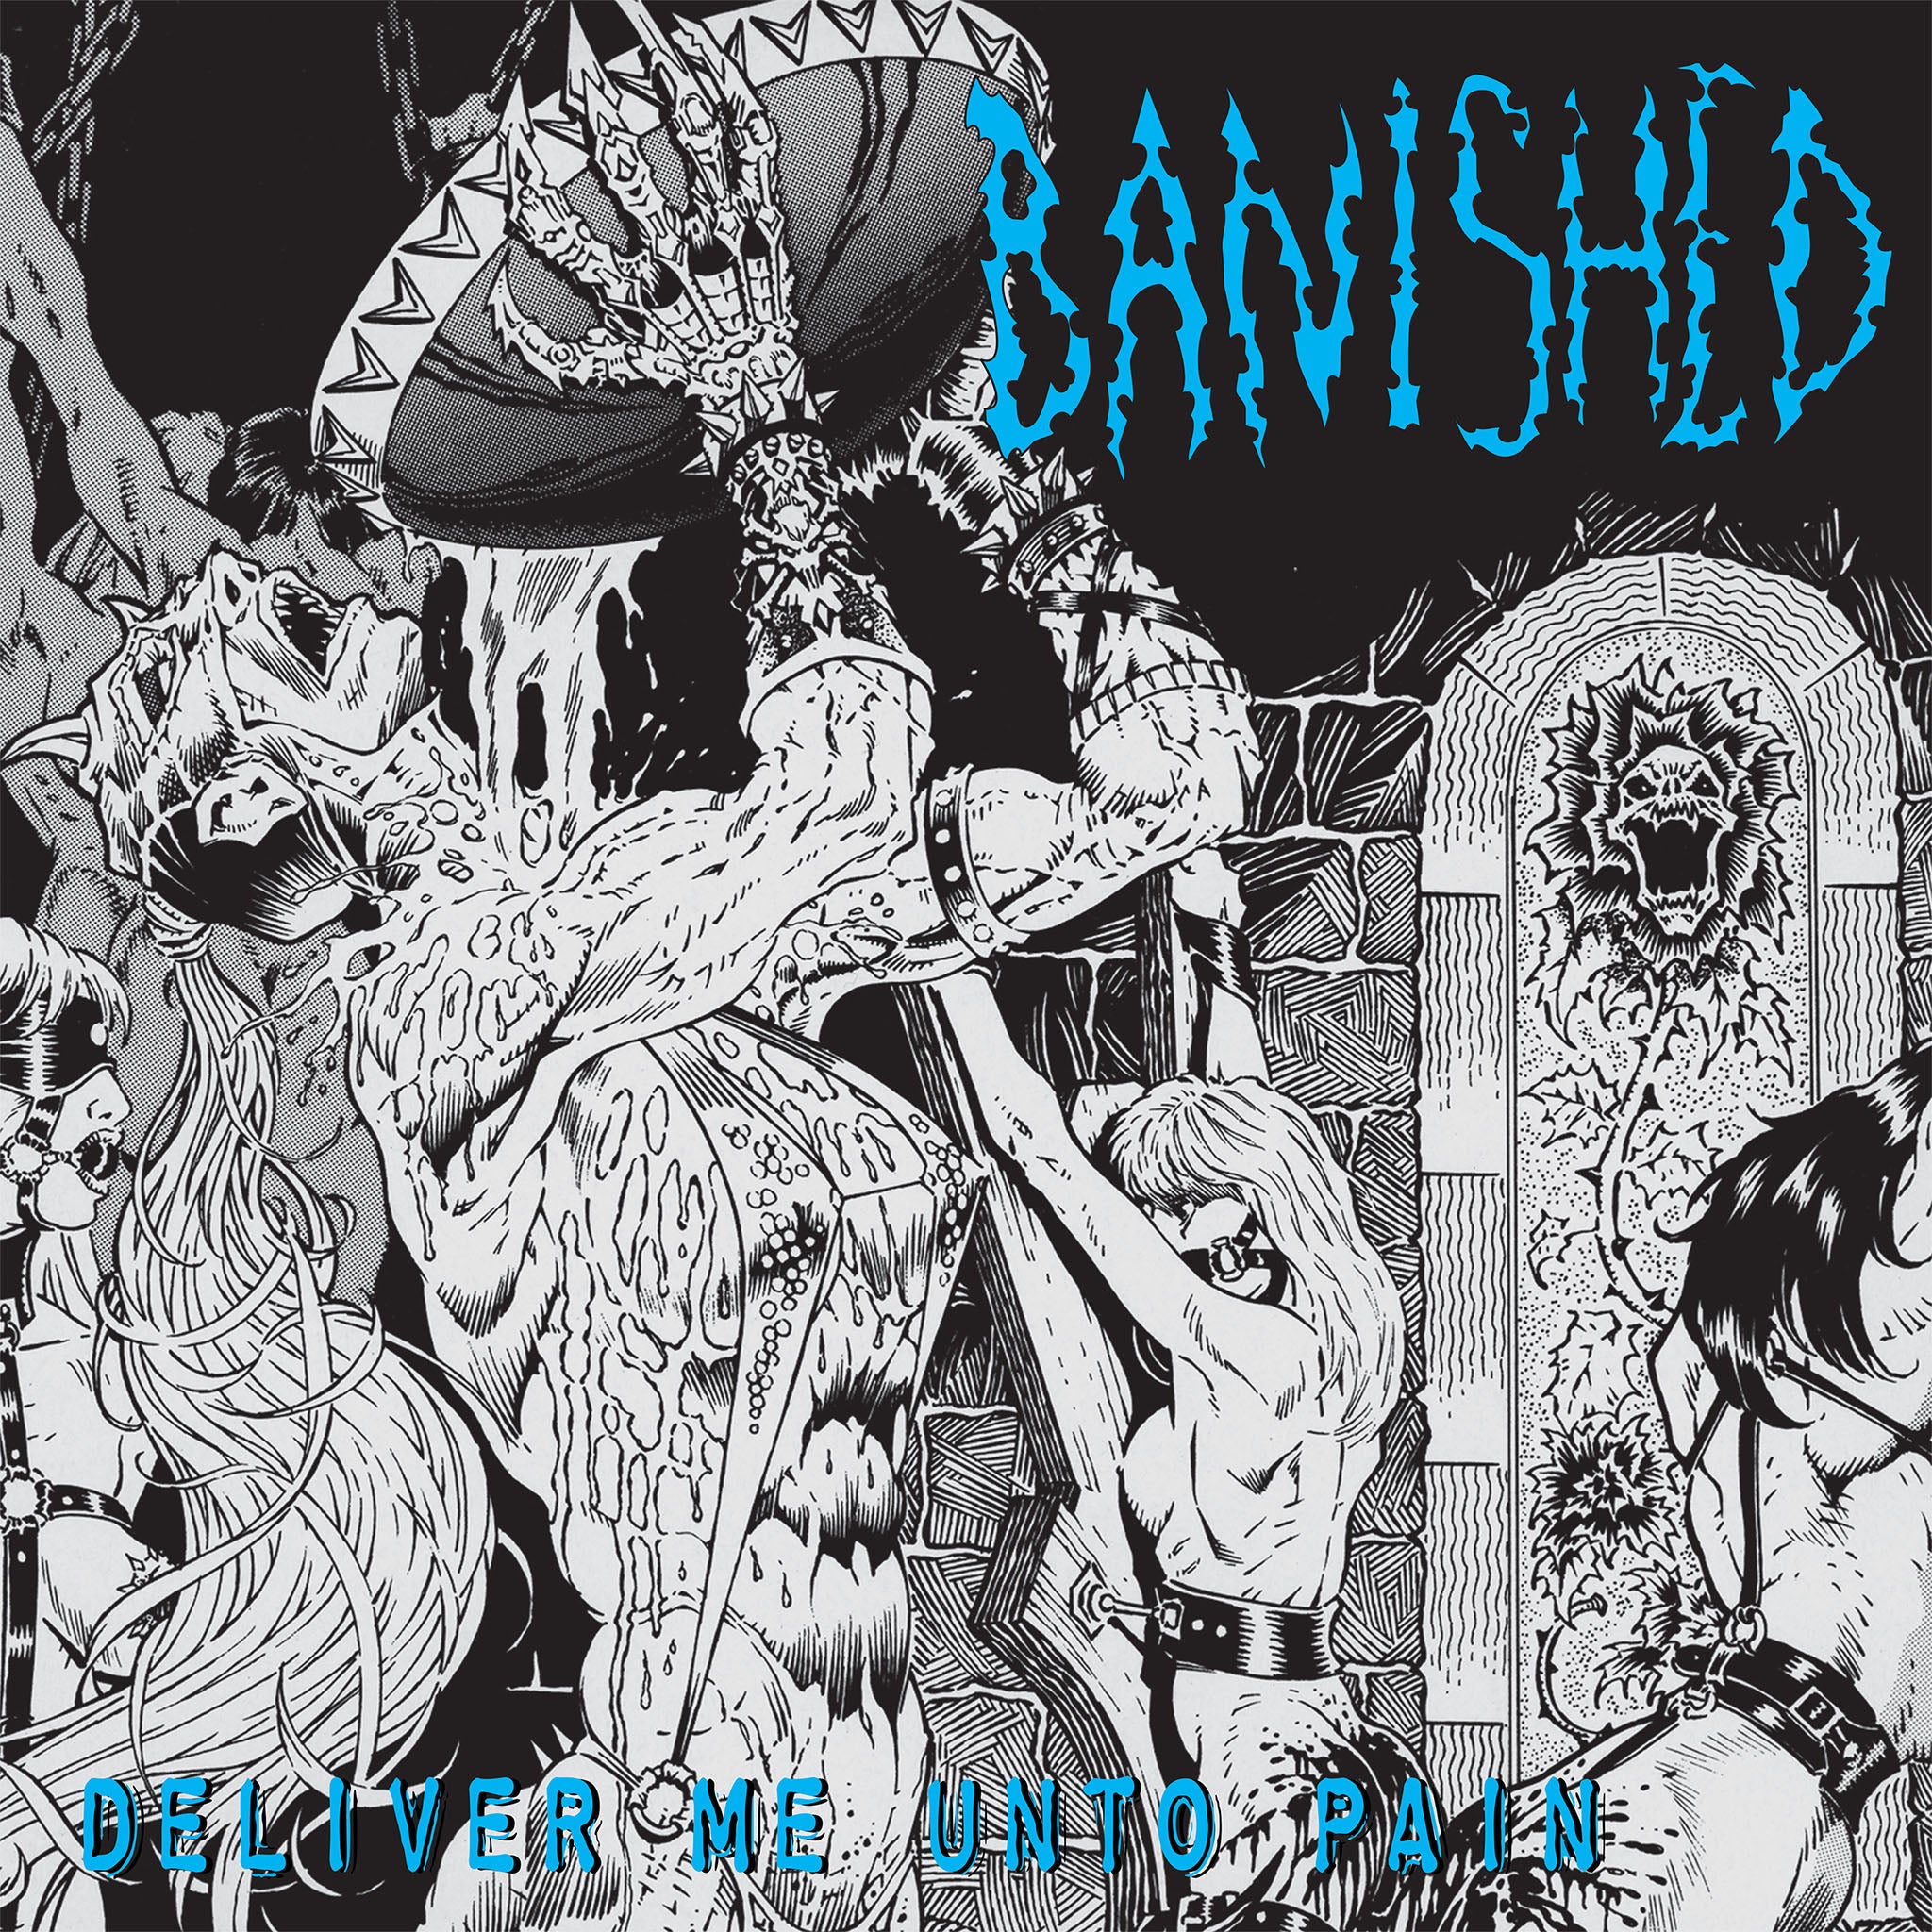 Banished - Deliver Me Unto Pain (2018 Reissue) (CD)